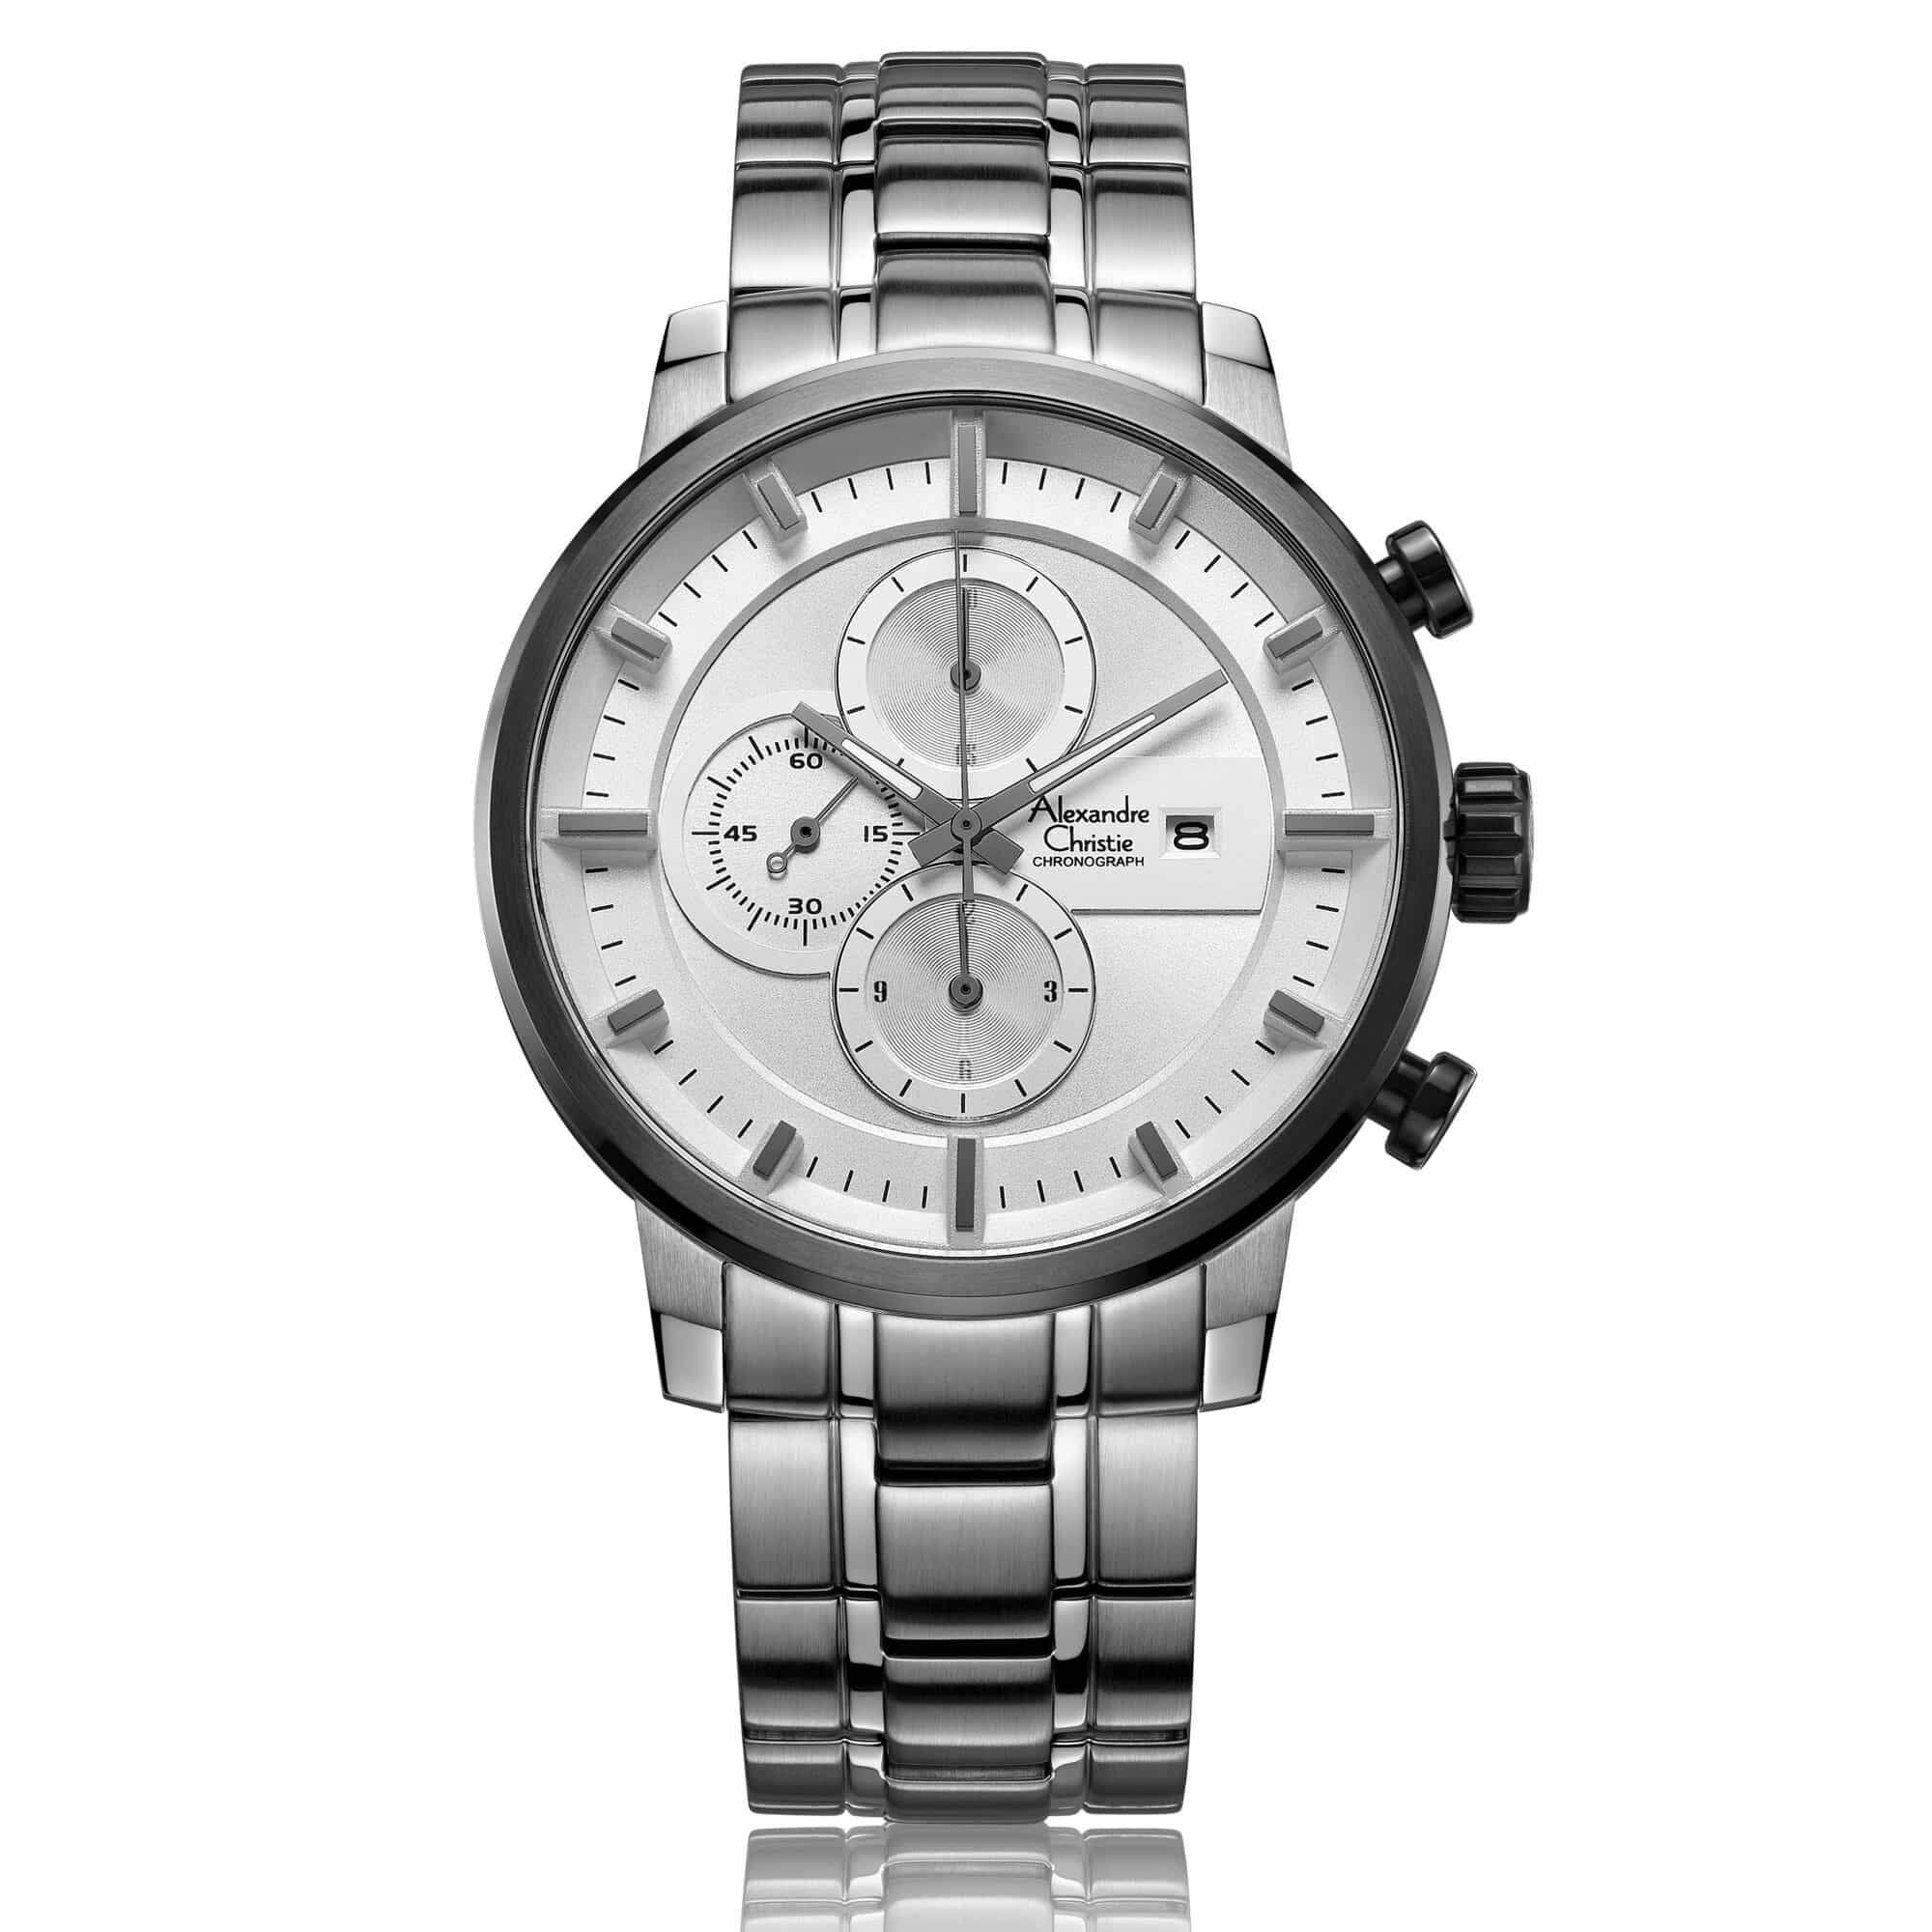 AC 6323 MCB Chronograph Watch For Men - Silver